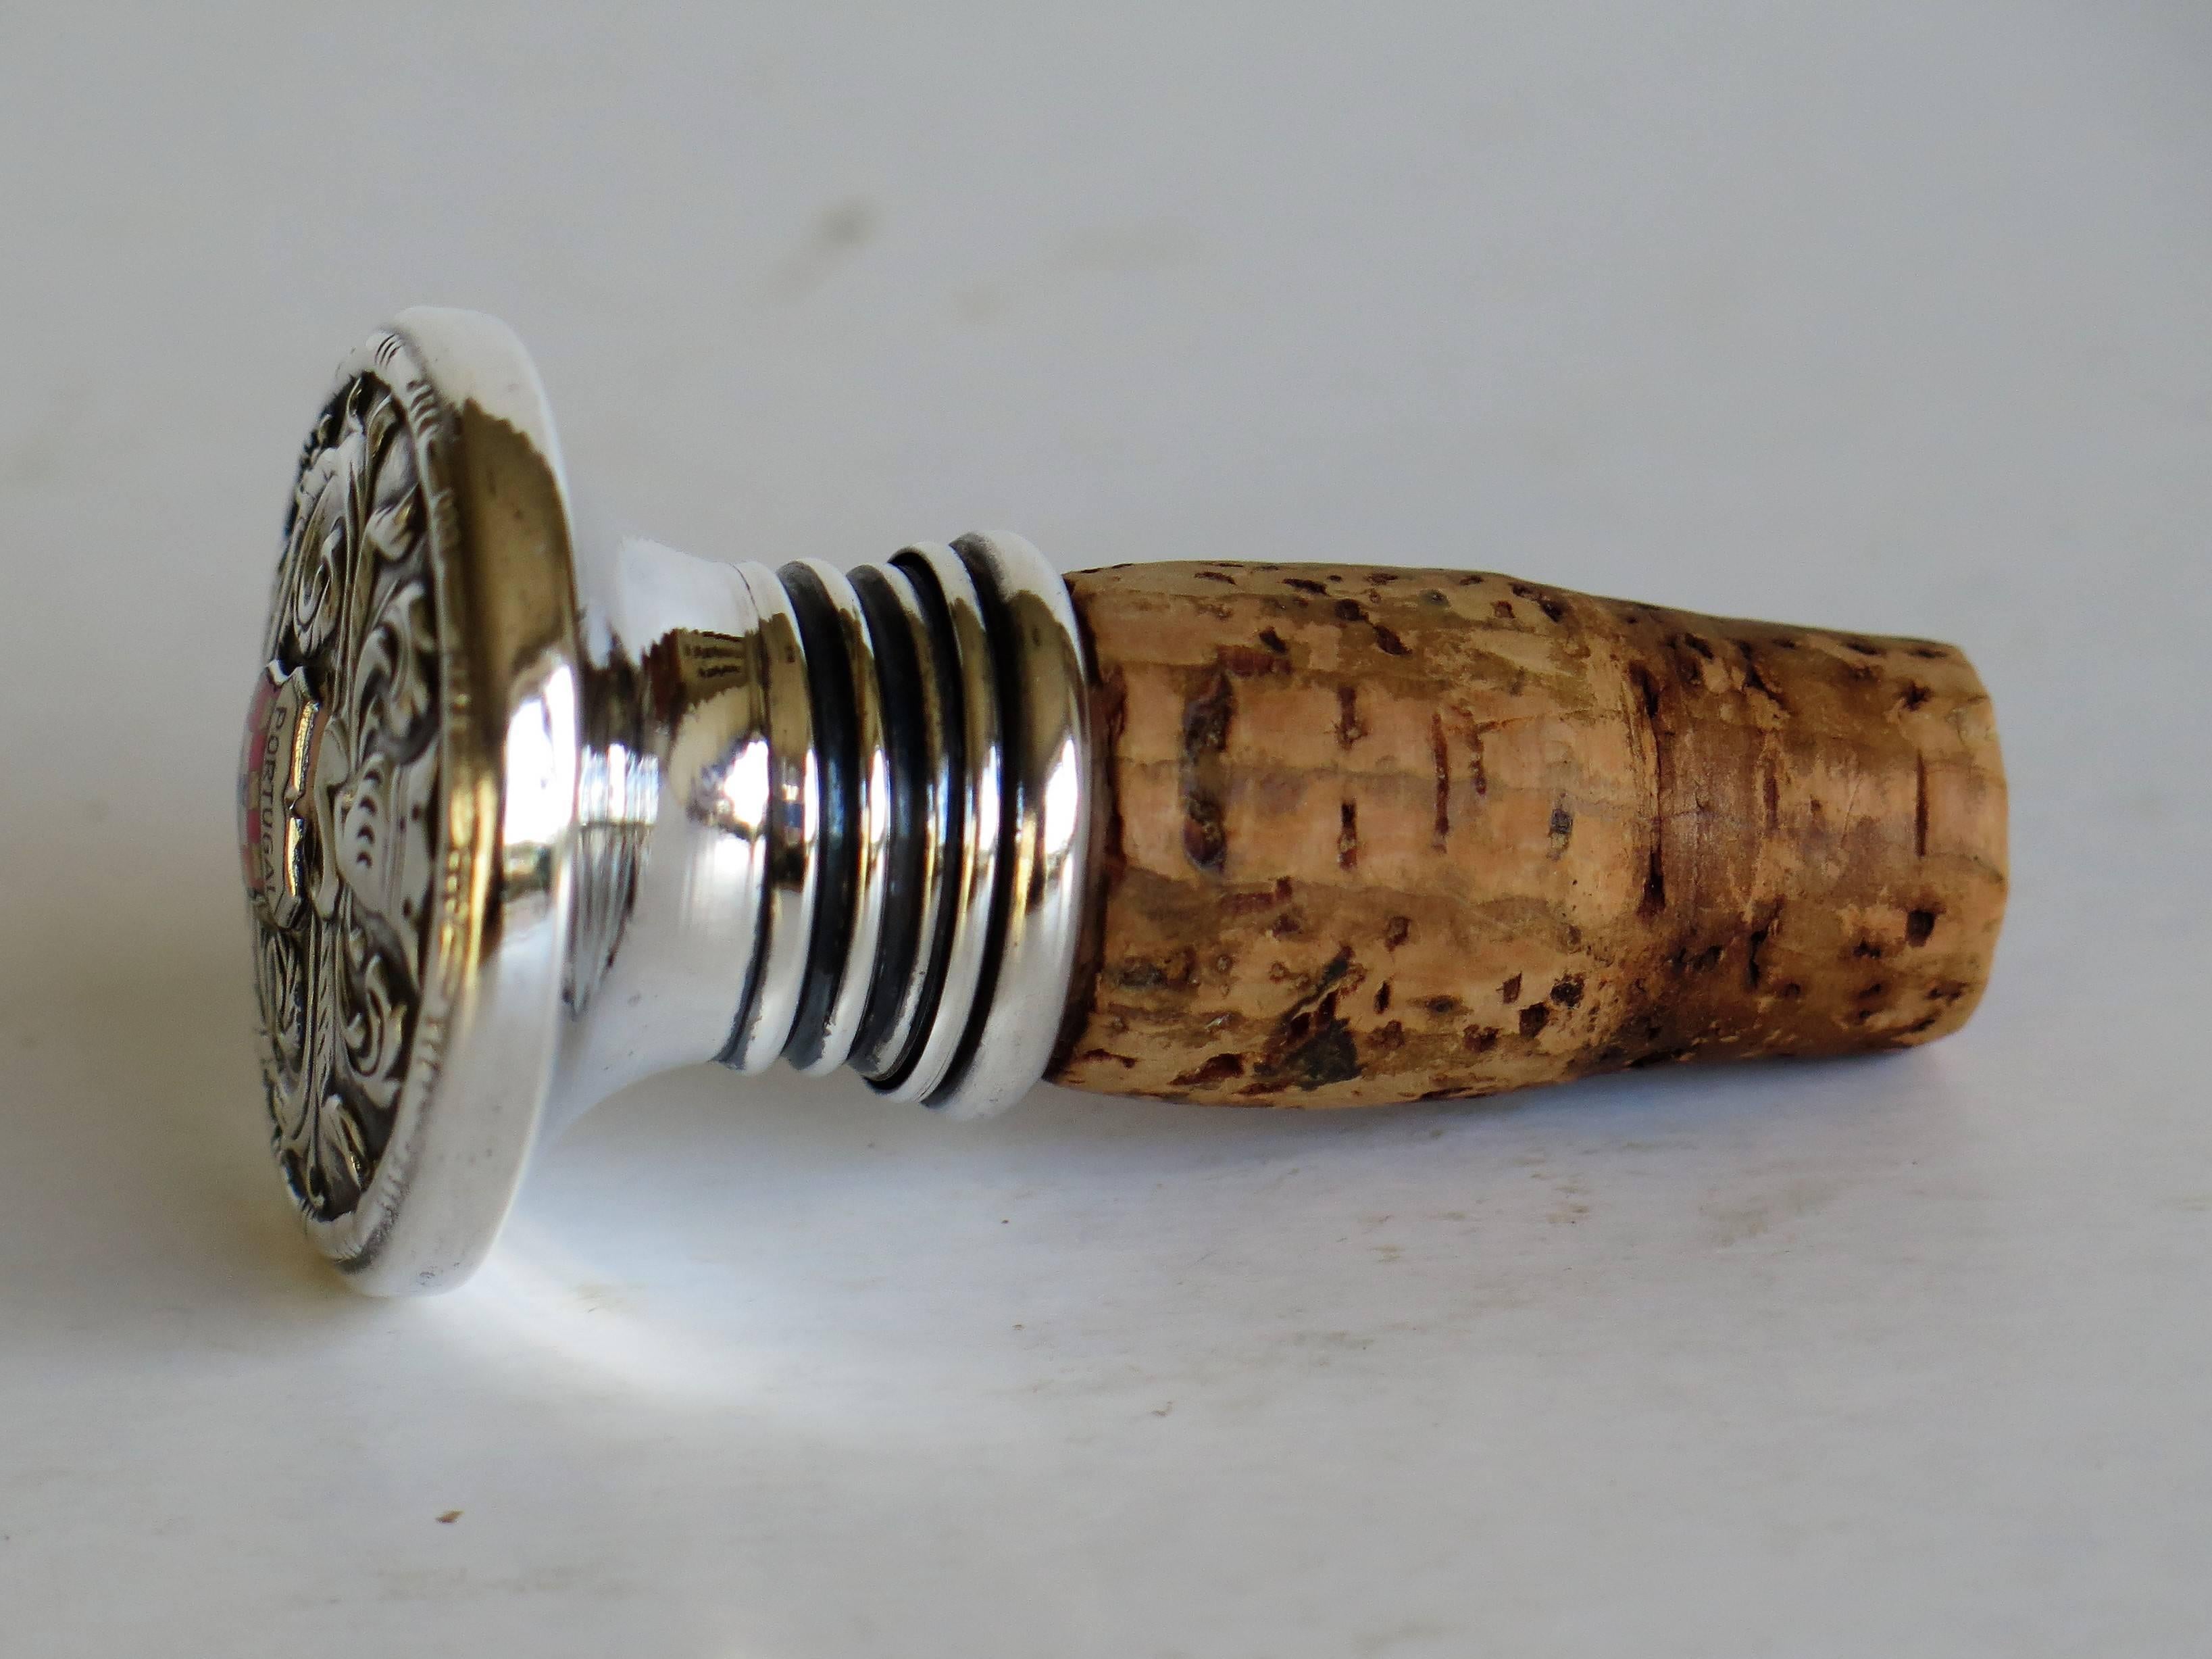 Silver Wine Bottle Stopper with Portugal Coat of Arms and Cork Stopper 1